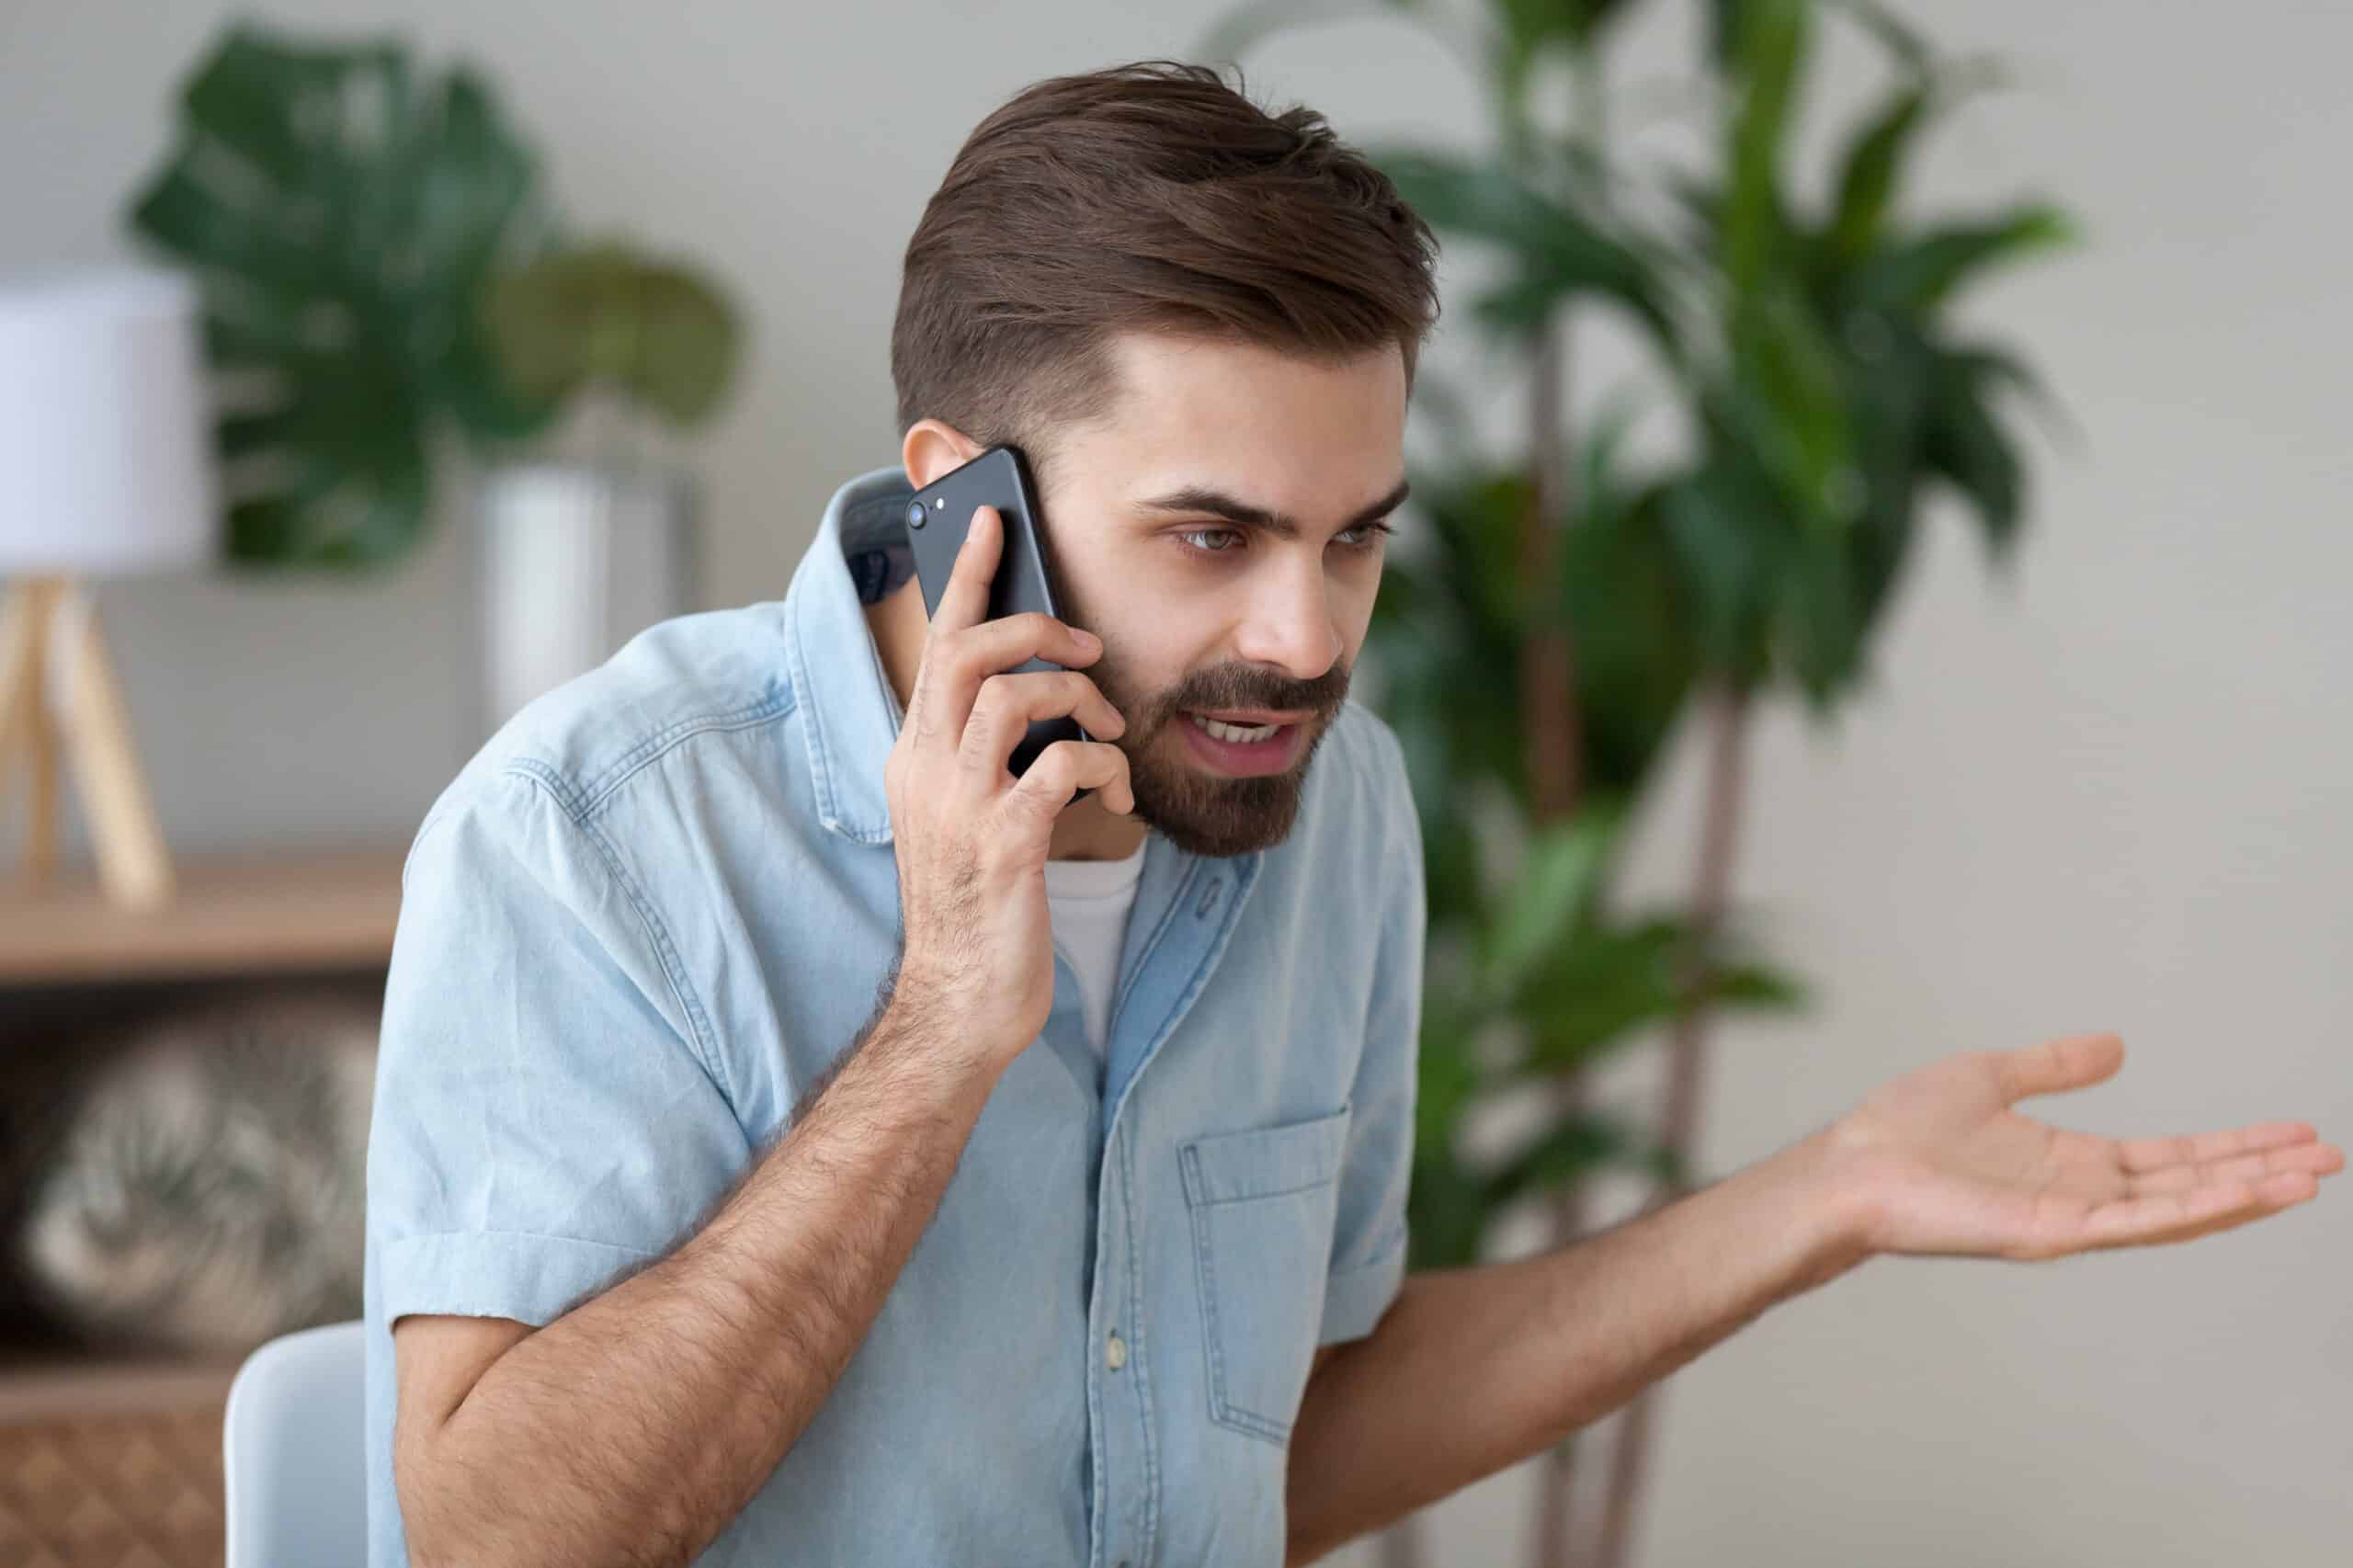 shutterstock 1230909607 scaled e1682779940275 - "If you stopped buying avocados, you could afford a house": 10 Worst Pieces of Advice Ever Offered to Millennials by Older Generations